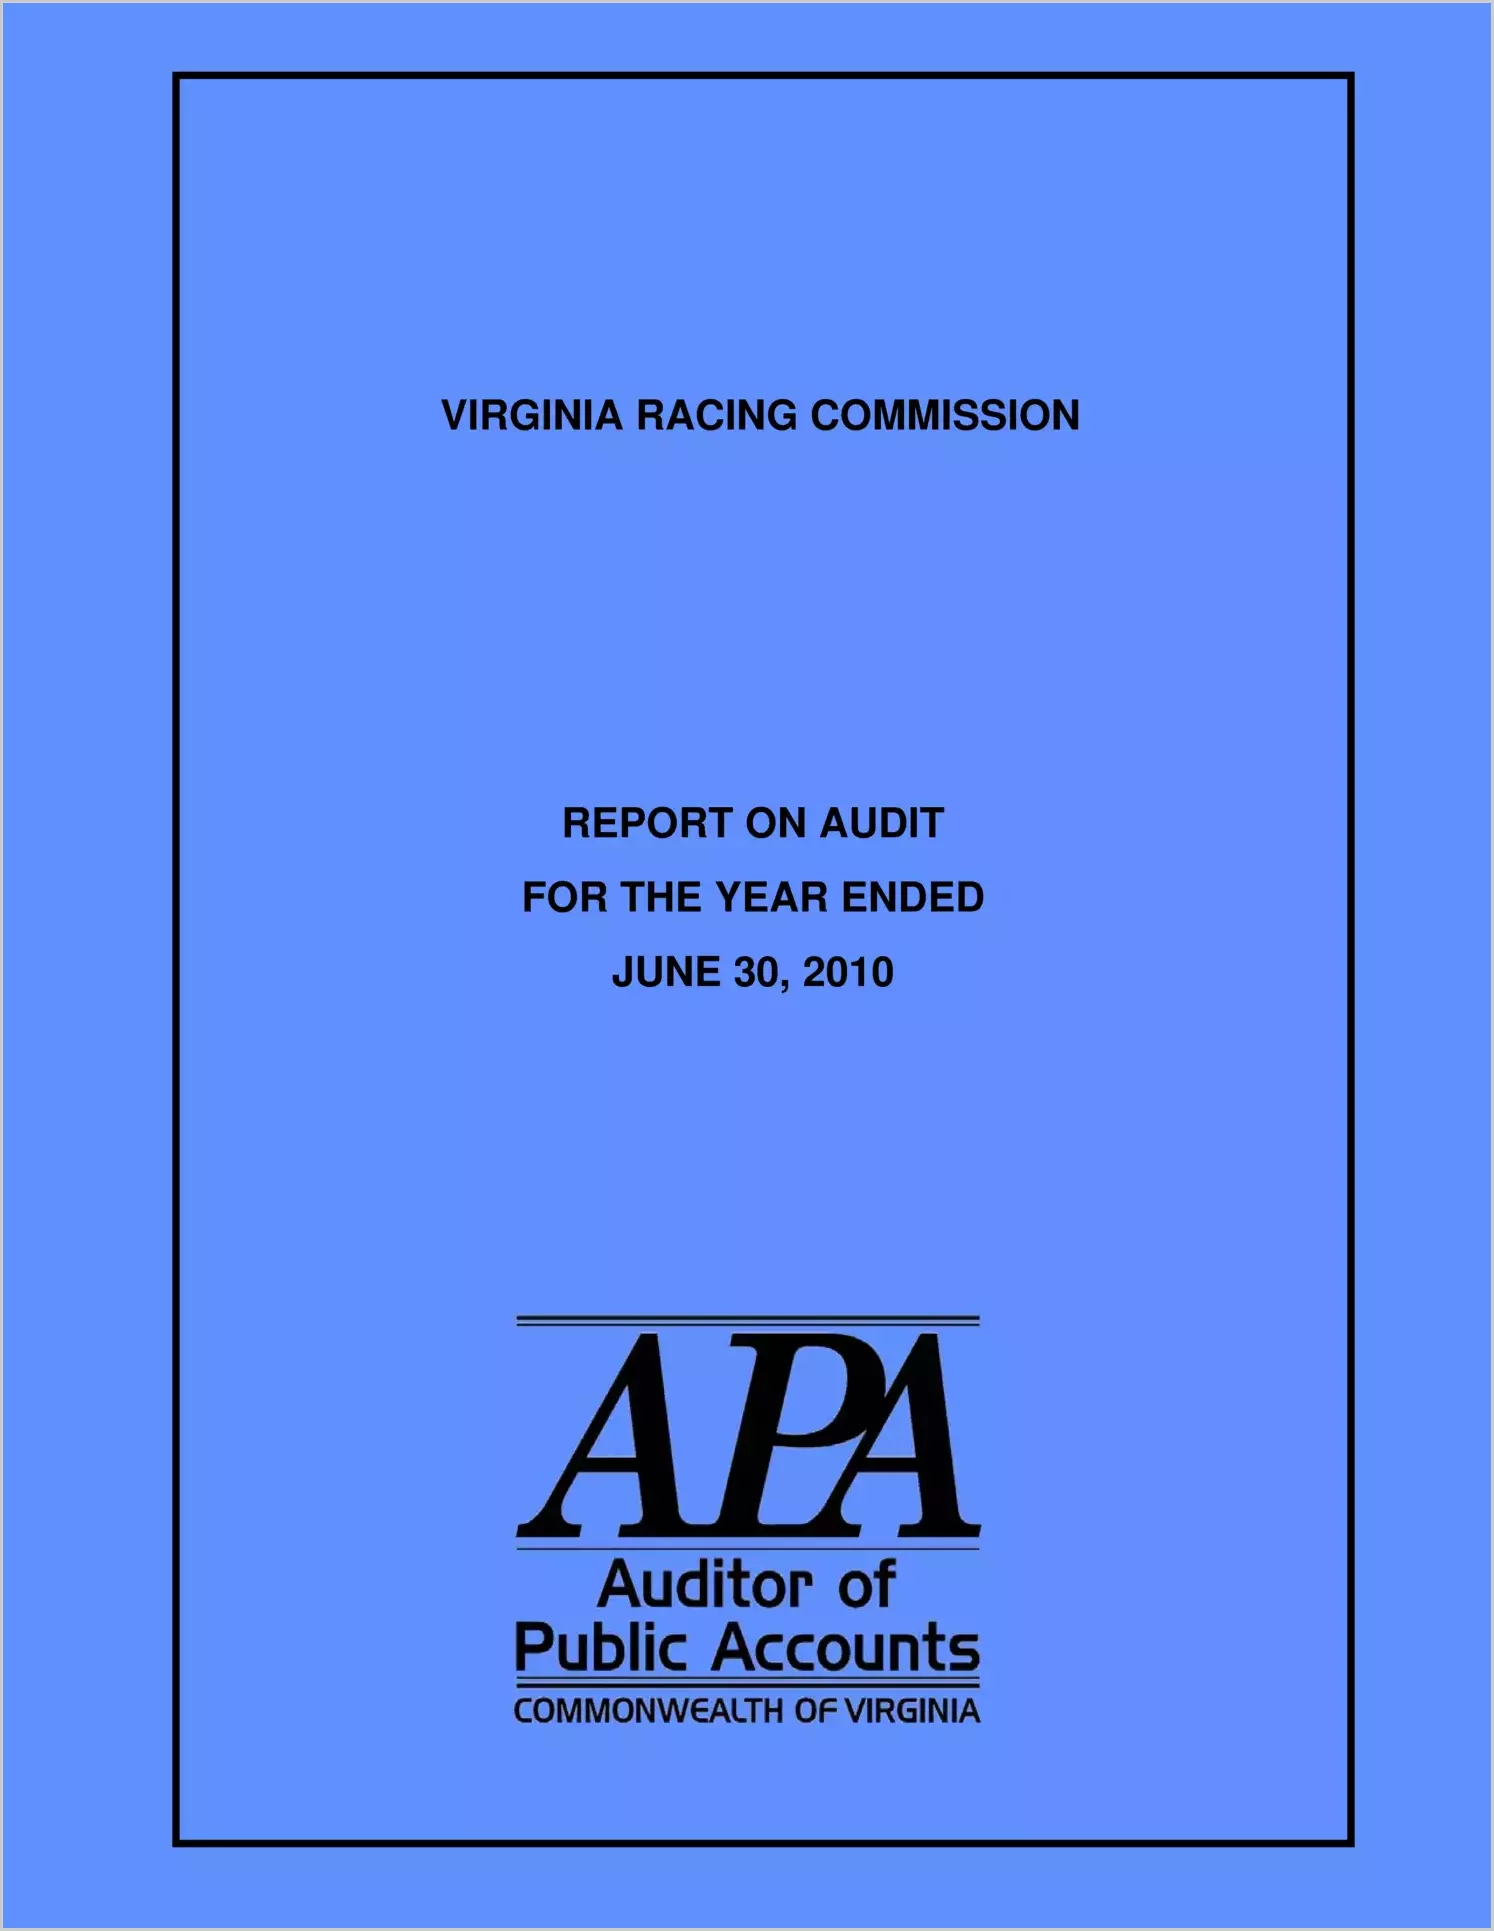 Virginia Racing Commission for the year ended June 30, 2010